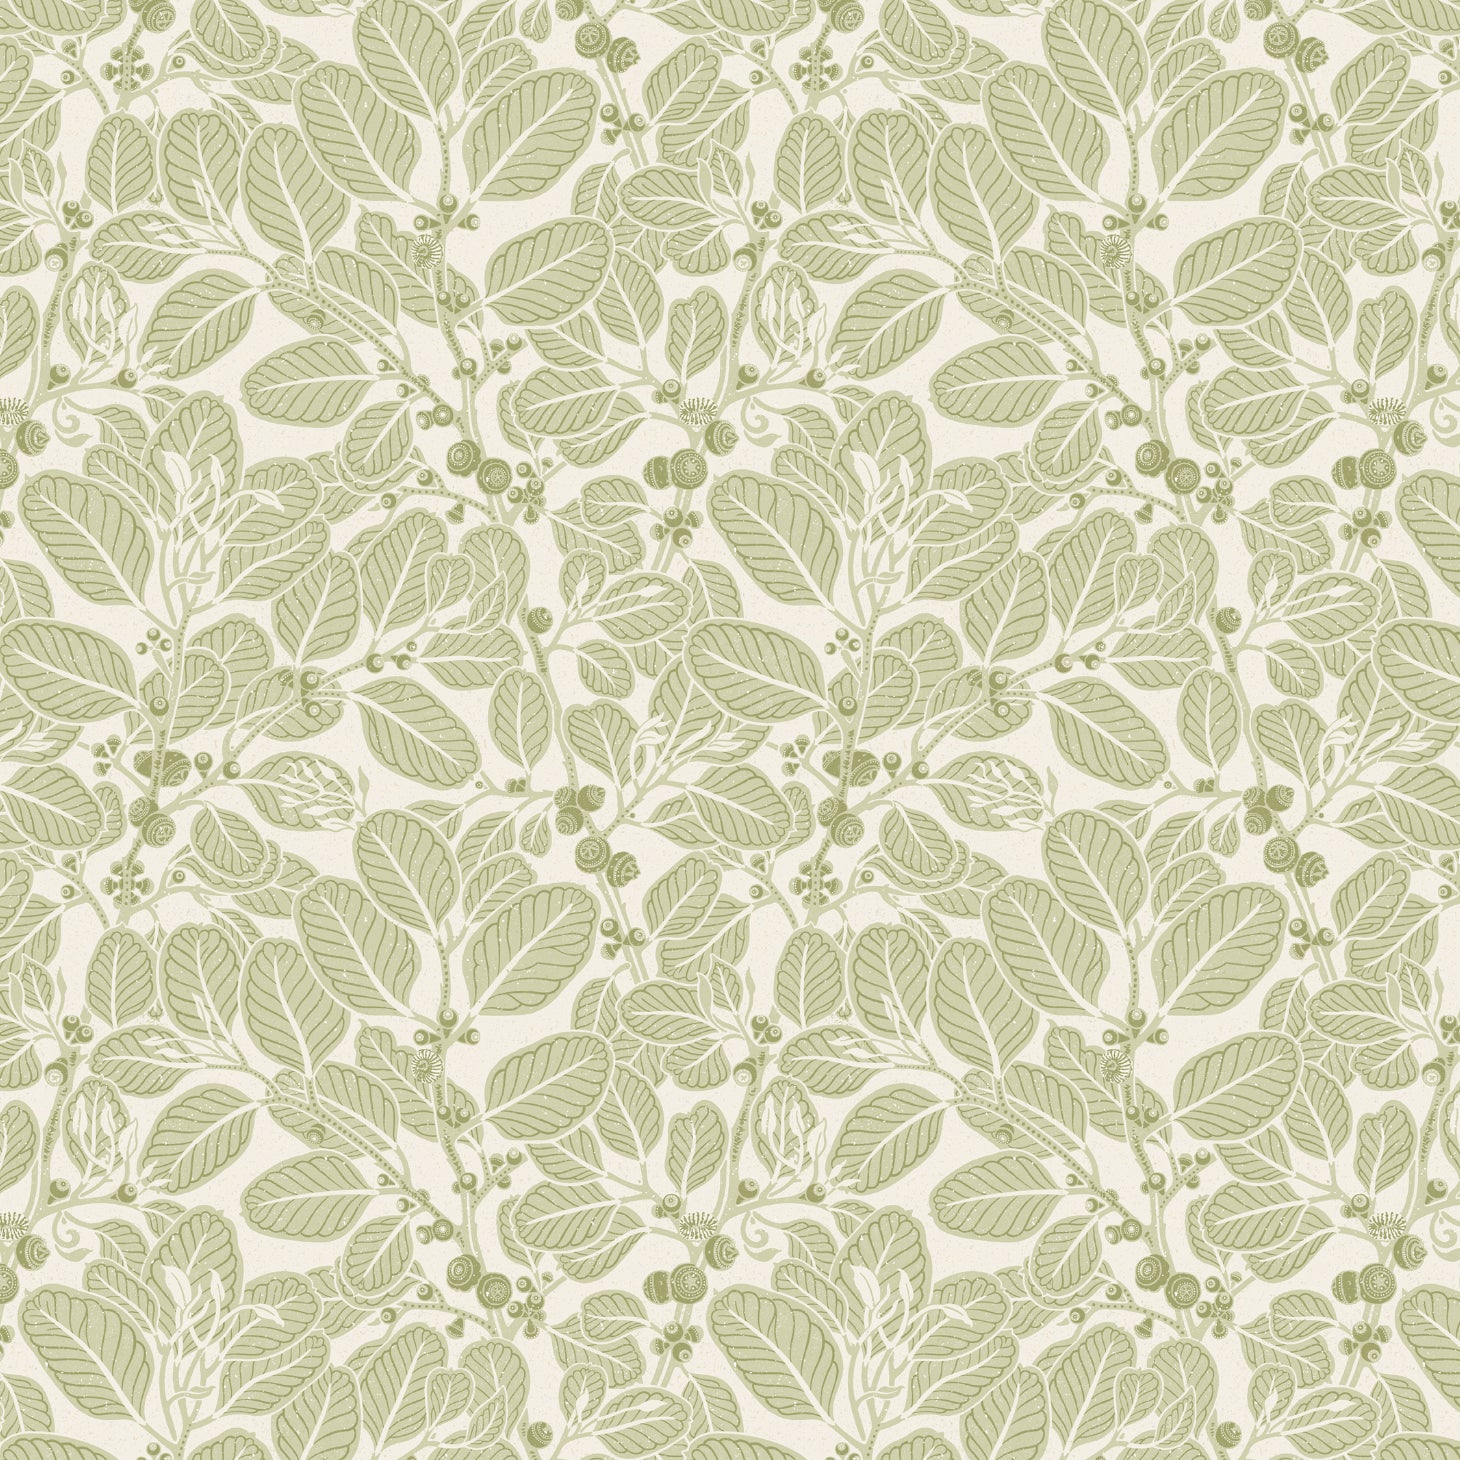 Detail of wallpaper in a dense leaf and stem print in sage on a white field.